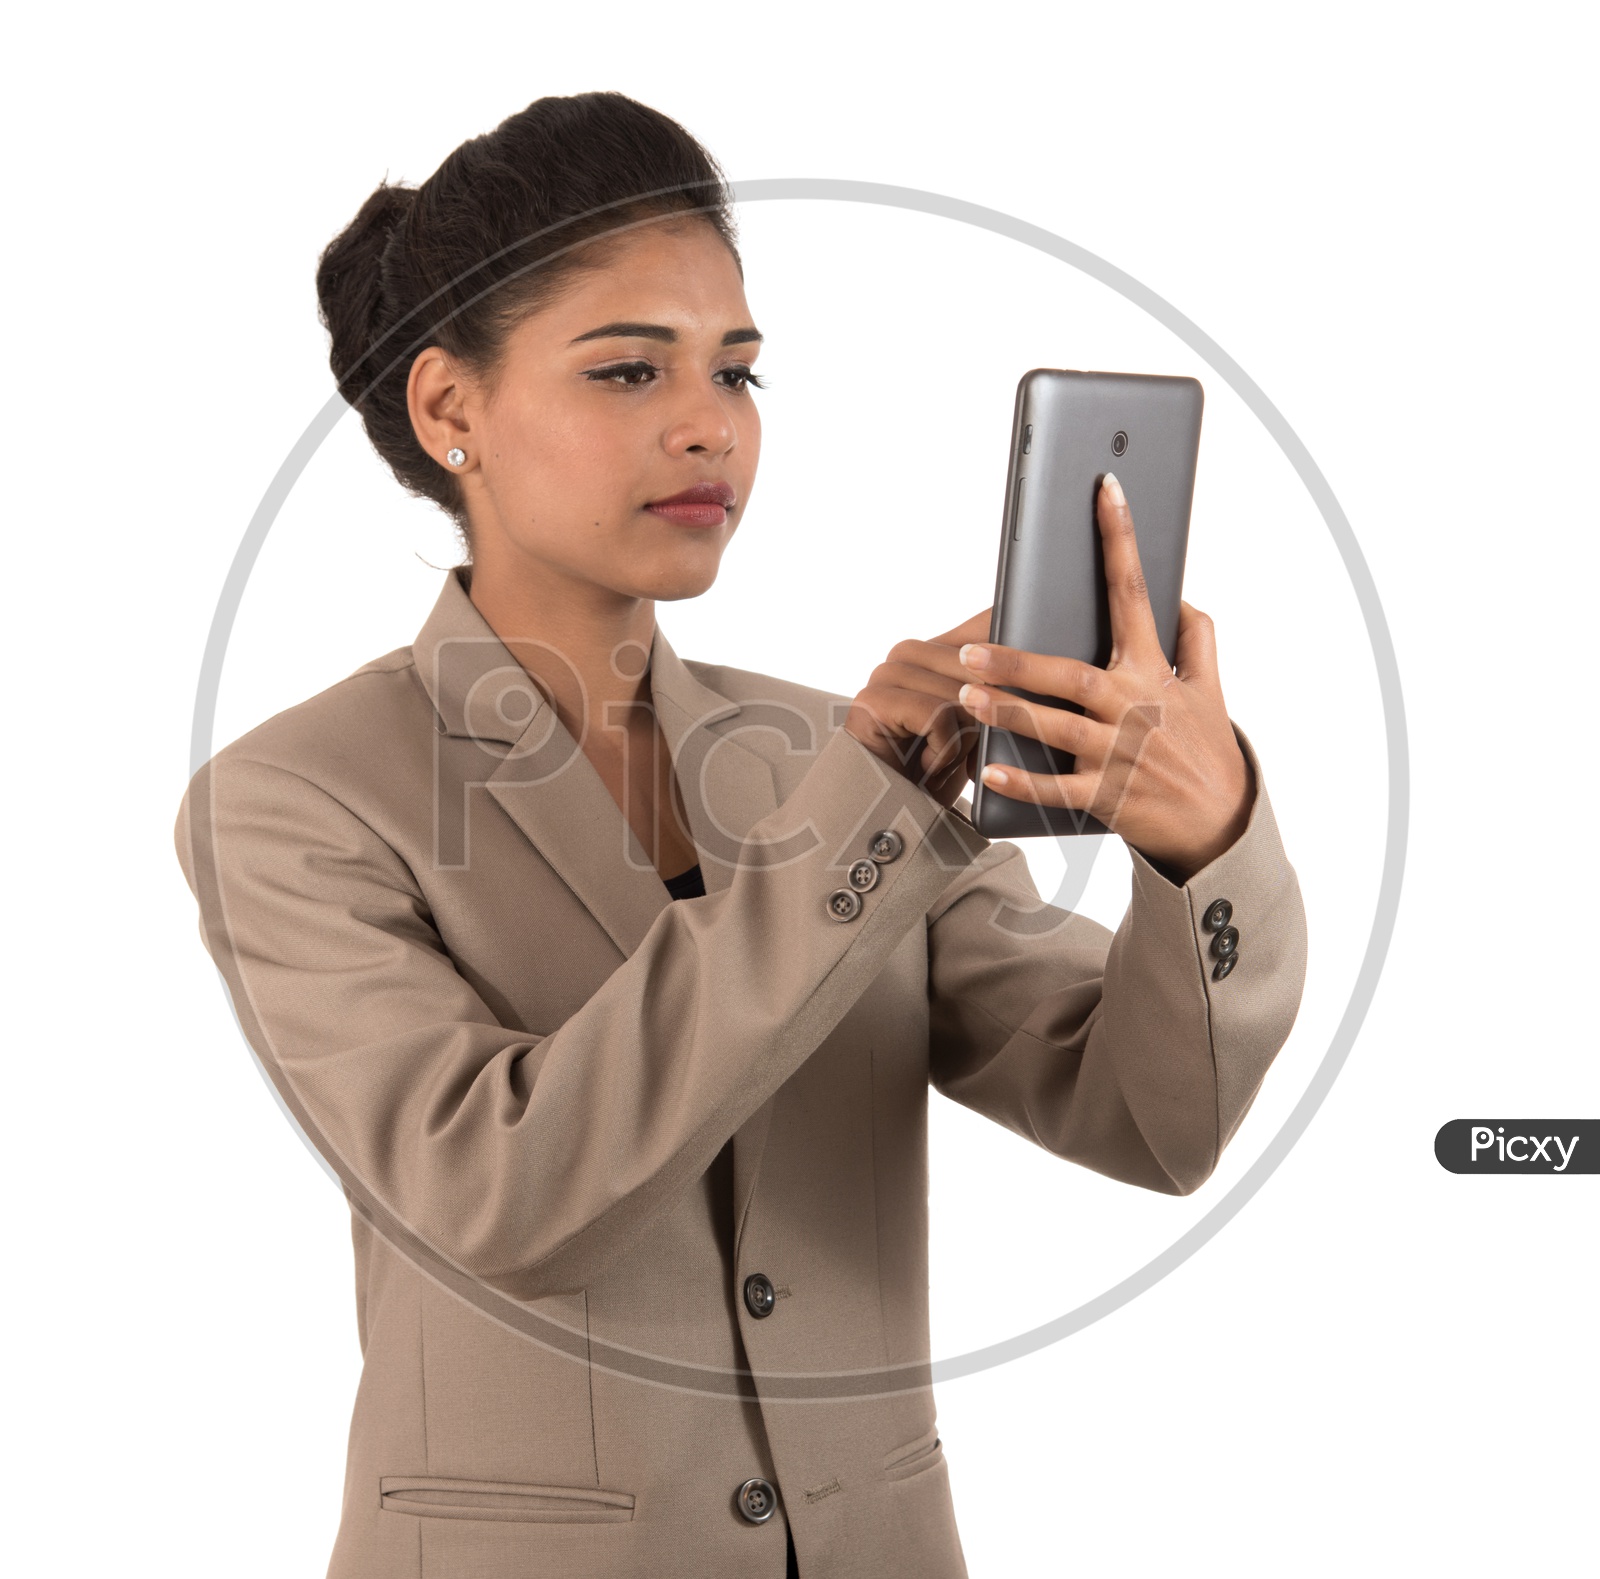 Young Indian business woman using a mobile phone or smartphone isolated on a white background